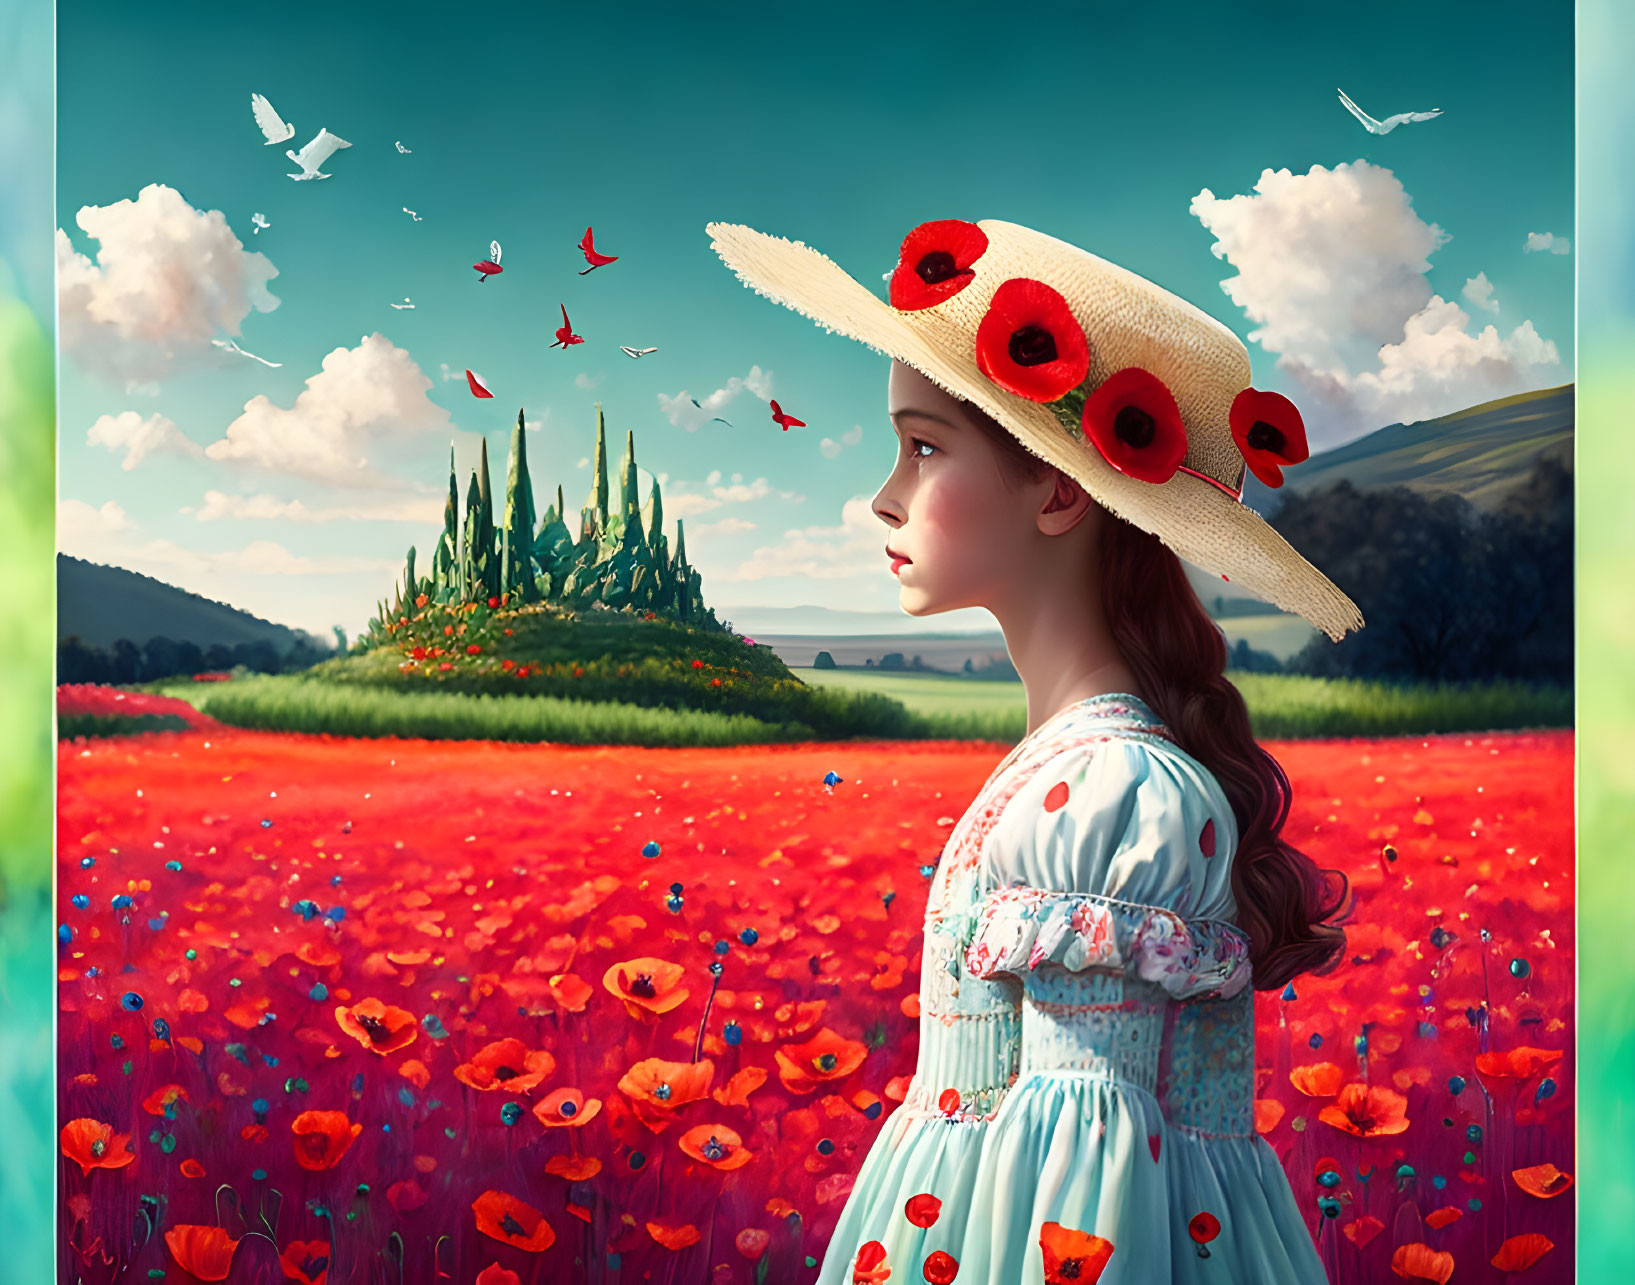 Girl in Blue Dress and Wide-Brimmed Hat in Vibrant Poppy Field with Birds